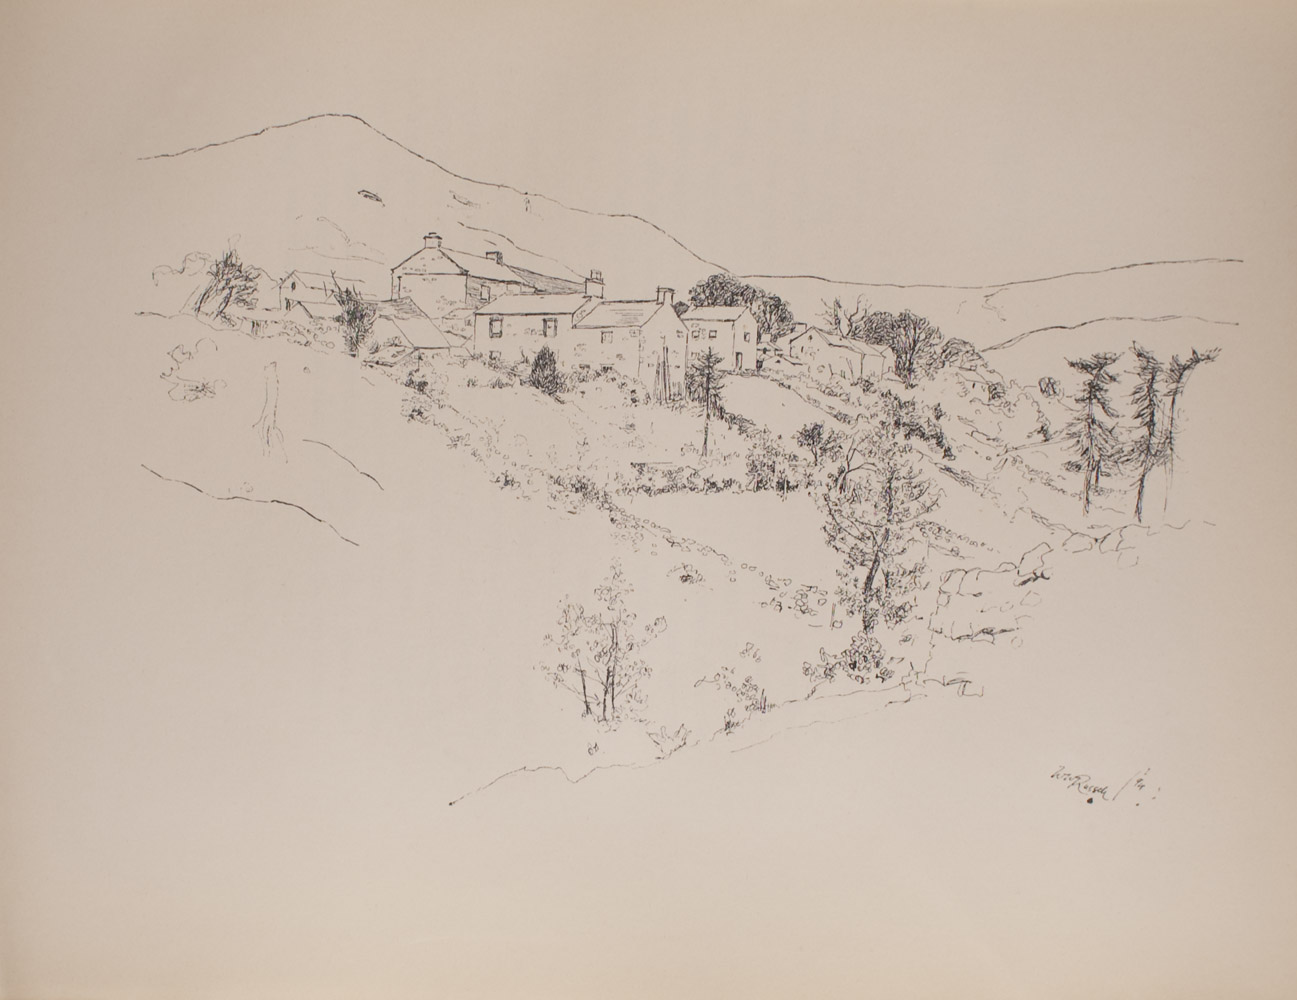 The image is of a small village In the foreground there are trees a stone enclosure and shrubbery The village dwellings are in the middle ground In the background there are hills The image is not framed and is horizontally displayed